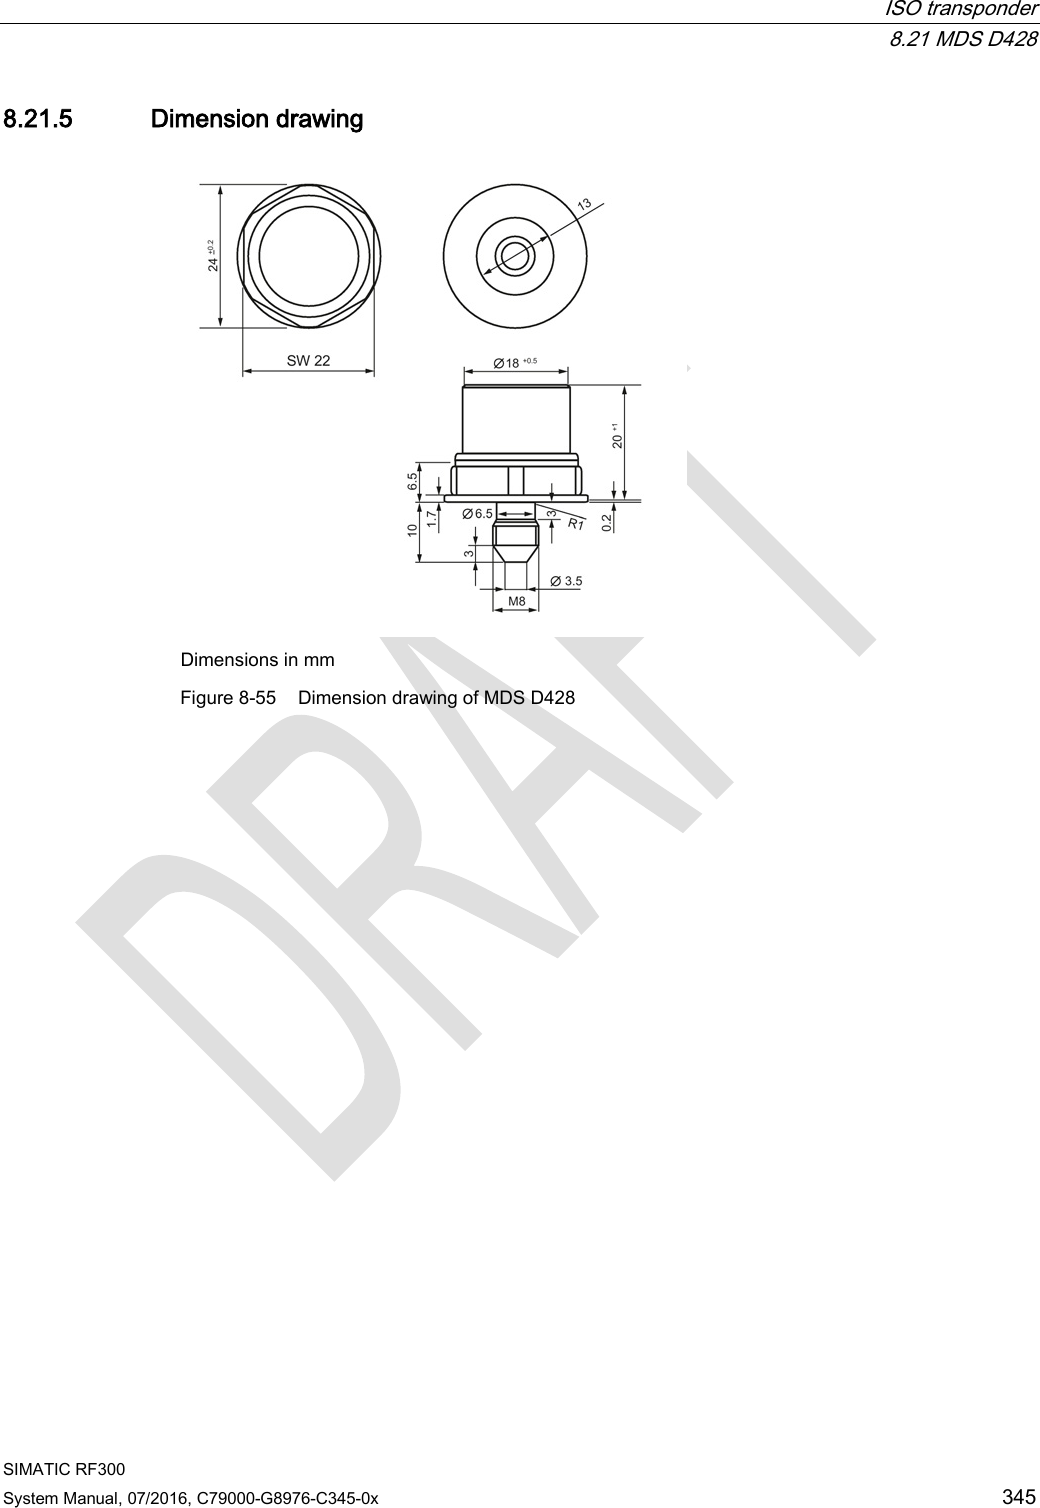  ISO transponder  8.21 MDS D428 SIMATIC RF300 System Manual, 07/2016, C79000-G8976-C345-0x 345 8.21.5 Dimension drawing  Dimensions in mm Figure 8-55 Dimension drawing of MDS D428 